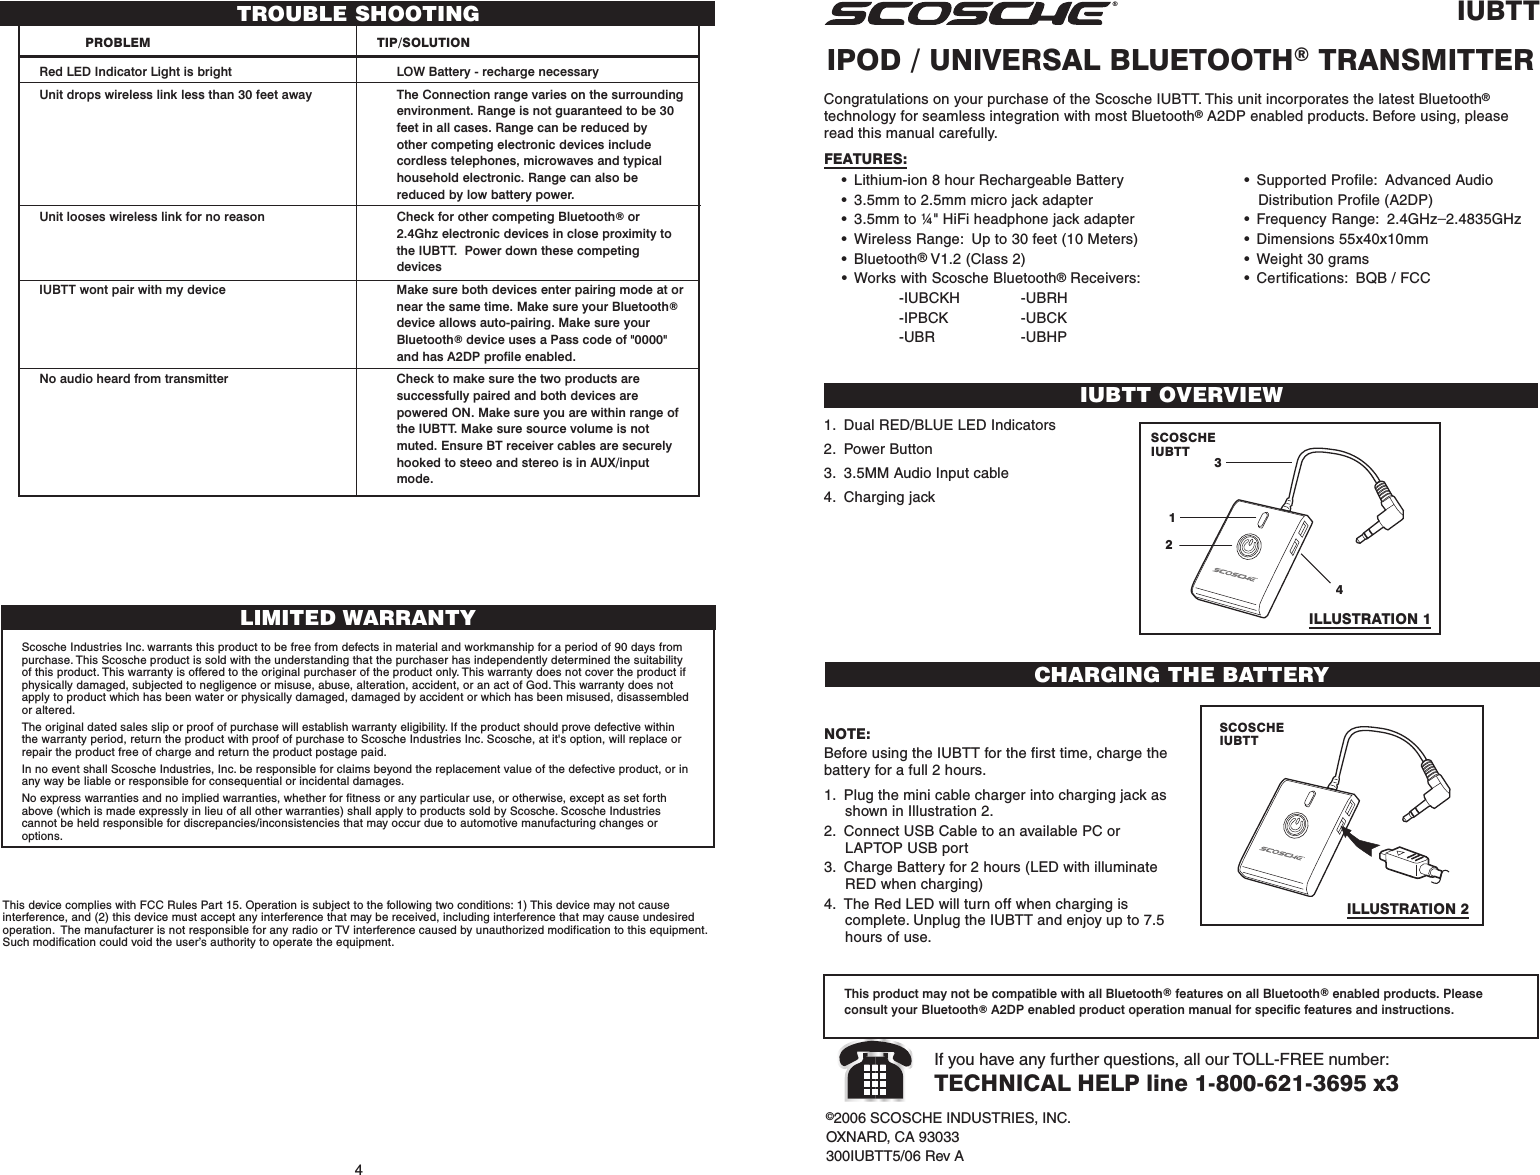 IUBTTIPOD / UNIVERSAL BLUETOOTH® TRANSMITTERIUBTT OVERVIEW©2006 SCOSCHE INDUSTRIES, INC.OXNARD, CA 93033300IUBTT5/06 Rev AIf you have any further questions, all our TOLL-FREE number:TECHNICAL HELP line 1-800-621-3695 x34Congratulations on your purchase of the Scosche IUBTT. This unit incorporates the latest Bluetooth®technology for seamless integration with most Bluetooth® A2DP enabled products. Before using, pleaseread this manual carefully.FEATURES:• Lithium-ion 8 hour Rechargeable Battery• 3.5mm to 2.5mm micro jack adapter• 3.5mm to ¼&quot; HiFi headphone jack adapter• Wireless Range: Up to 30 feet (10 Meters)• Bluetooth® V1.2 (Class 2)• Works with Scosche Bluetooth® Receivers:-IUBCKH -UBRH-IPBCK -UBCK-UBR -UBHP1. Dual RED/BLUE LED Indicators2. Power Button3. 3.5MM Audio Input cable4. Charging jackThis product may not be compatible with all Bluetooth® features on all Bluetooth® enabled products. Pleaseconsult your Bluetooth® A2DP enabled product operation manual for specific features and instructions.• Supported Profile: Advanced AudioDistribution Profile (A2DP)• Frequency Range: 2.4GHz_2.4835GHz• Dimensions 55x40x10mm• Weight 30 grams• Certifications: BQB / FCCLIMITED WARRANTYScosche Industries Inc. warrants this product to be free from defects in material and workmanship for a period of 90 days frompurchase. This Scosche product is sold with the understanding that the purchaser has independently determined the suitabilityof this product. This warranty is offered to the original purchaser of the product only. This warranty does not cover the product ifphysically damaged, subjected to negligence or misuse, abuse, alteration, accident, or an act of God. This warranty does notapply to product which has been water or physically damaged, damaged by accident or which has been misused, disassembledor altered.The original dated sales slip or proof of purchase will establish warranty eligibility. If the product should prove defective withinthe warranty period, return the product with proof of purchase to Scosche Industries Inc. Scosche, at it&apos;s option, will replace orrepair the product free of charge and return the product postage paid.In no event shall Scosche Industries, Inc. be responsible for claims beyond the replacement value of the defective product, or inany way be liable or responsible for consequential or incidental damages.No express warranties and no implied warranties, whether for fitness or any particular use, or otherwise, except as set forthabove (which is made expressly in lieu of all other warranties) shall apply to products sold by Scosche. Scosche Industriescannot be held responsible for discrepancies/inconsistencies that may occur due to automotive manufacturing changes oroptions.This device complies with FCC Rules Part 15. Operation is subject to the following two conditions: 1) This device may not causeinterference, and (2) this device must accept any interference that may be received, including interference that may cause undesiredoperation.  The manufacturer is not responsible for any radio or TV interference caused by unauthorized modification to this equipment.Such modification could void the user’s authority to operate the equipment.4132CHARGING THE BATTERYNOTE:Before using the IUBTT for the first time, charge thebattery for a full 2 hours.1. Plug the mini cable charger into charging jack asshown in Illustration 2.2. Connect USB Cable to an available PC orLAPTOP USB port3. Charge Battery for 2 hours (LED with illuminateRED when charging)4. The Red LED will turn off when charging iscomplete. Unplug the IUBTT and enjoy up to 7.5hours of use.SCOSCHEIUBTTSCOSCHEIUBTTTROUBLE SHOOTINGPROBLEM TIP/SOLUTIONRed LED Indicator Light is bright LOW Battery - recharge necessaryUnit drops wireless link less than 30 feet away The Connection range varies on the surroundingenvironment. Range is not guaranteed to be 30feet in all cases. Range can be reduced byother competing electronic devices includecordless telephones, microwaves and typicalhousehold electronic. Range can also bereduced by low battery power.Unit looses wireless link for no reason Check for other competing Bluetooth® or2.4Ghz electronic devices in close proximity tothe IUBTT.  Power down these competingdevicesIUBTT wont pair with my device Make sure both devices enter pairing mode at ornear the same time. Make sure your Bluetooth®device allows auto-pairing. Make sure yourBluetooth® device uses a Pass code of &quot;0000&quot;and has A2DP profile enabled.No audio heard from transmitter Check to make sure the two products aresuccessfully paired and both devices arepowered ON. Make sure you are within range ofthe IUBTT. Make sure source volume is notmuted. Ensure BT receiver cables are securelyhooked to steeo and stereo is in AUX/inputmode.ILLUSTRATION 1ILLUSTRATION 2